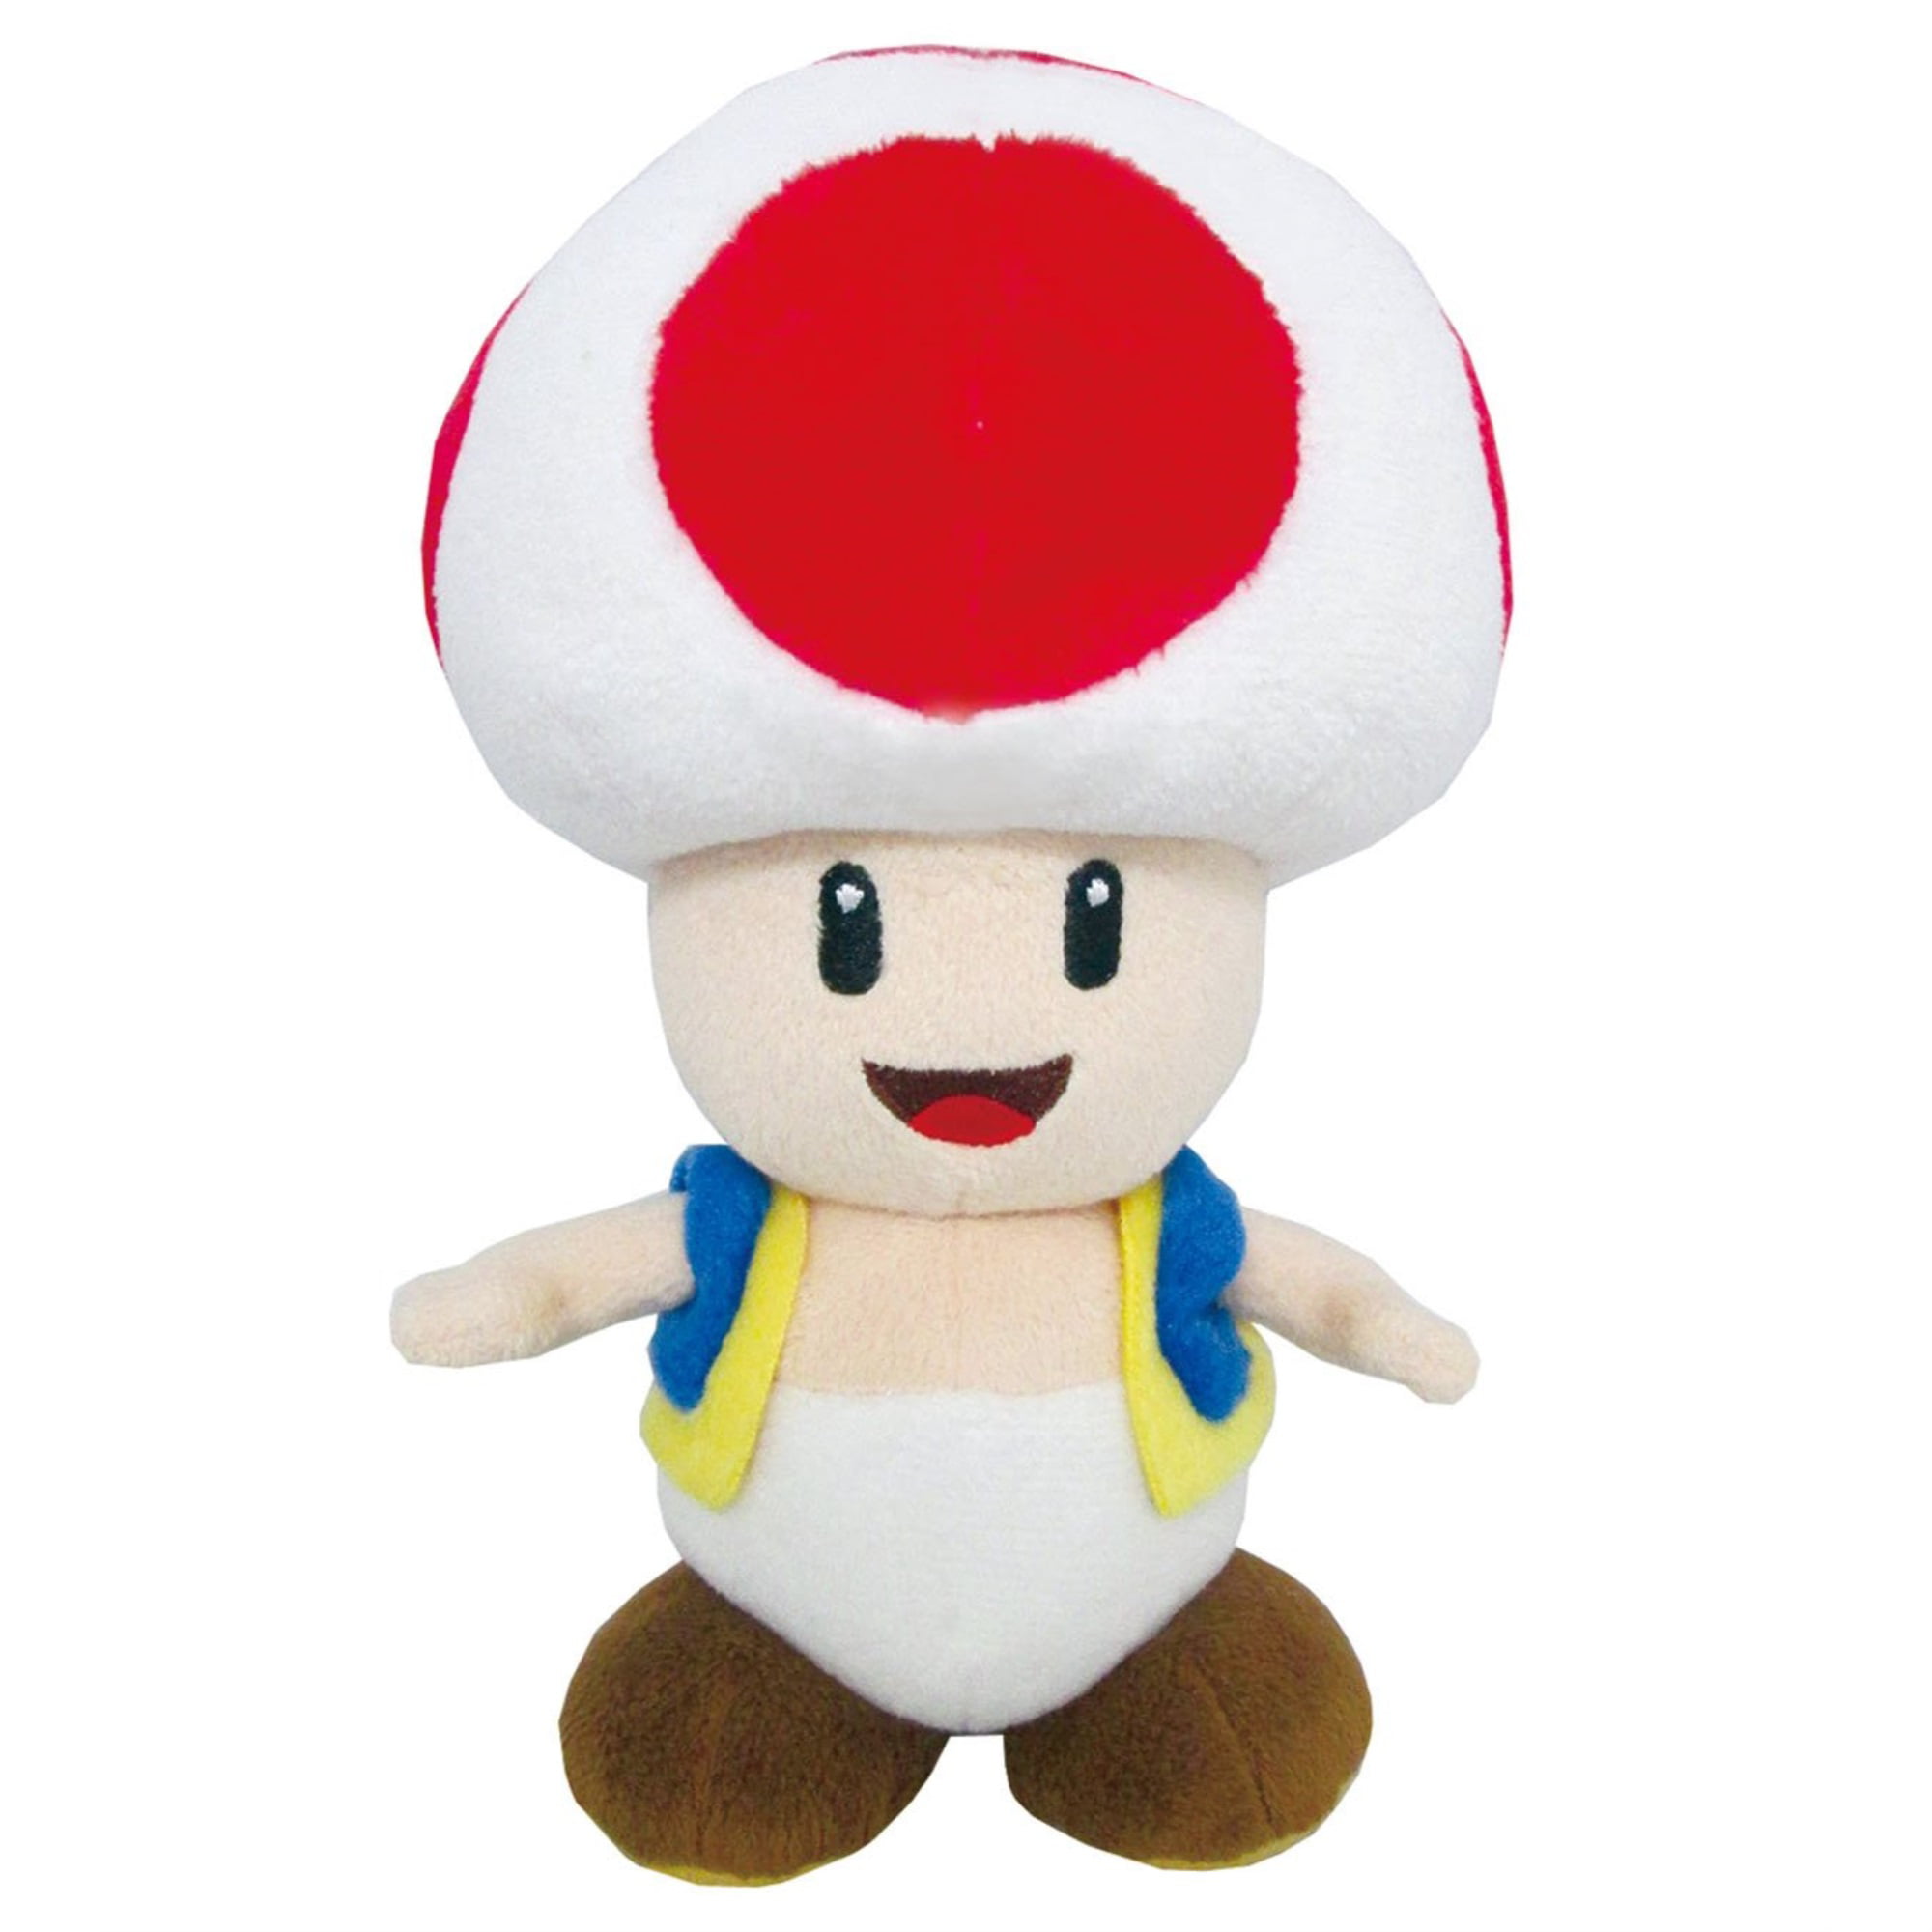 Plush Beanie Soft Toy Yoshi From Super Mario 30cm 12 Inches Original and for sale online 